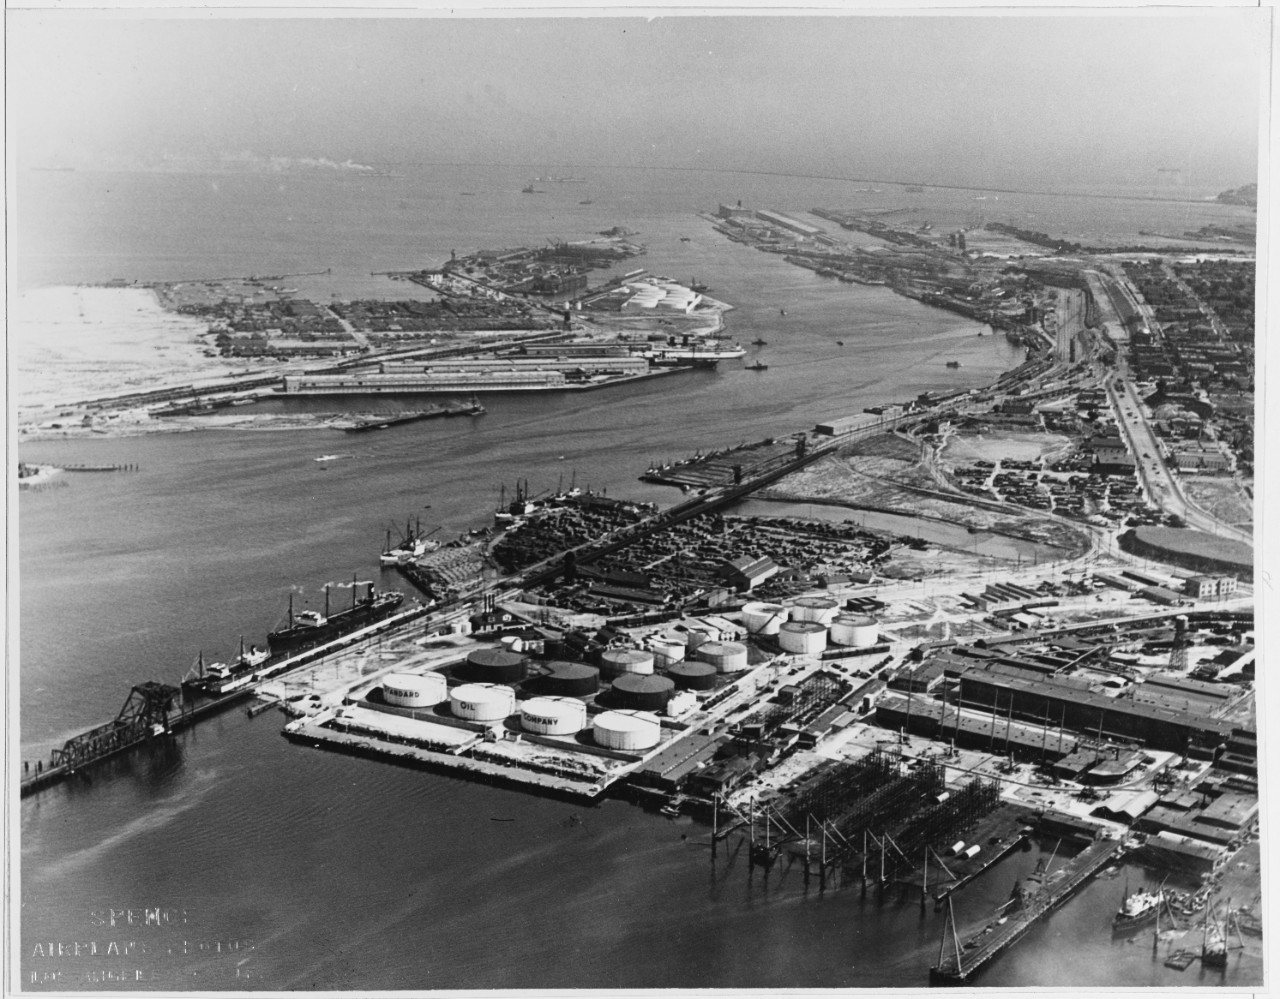 Los Angeles, California. Outer harbor from Washington. June 16, 1925